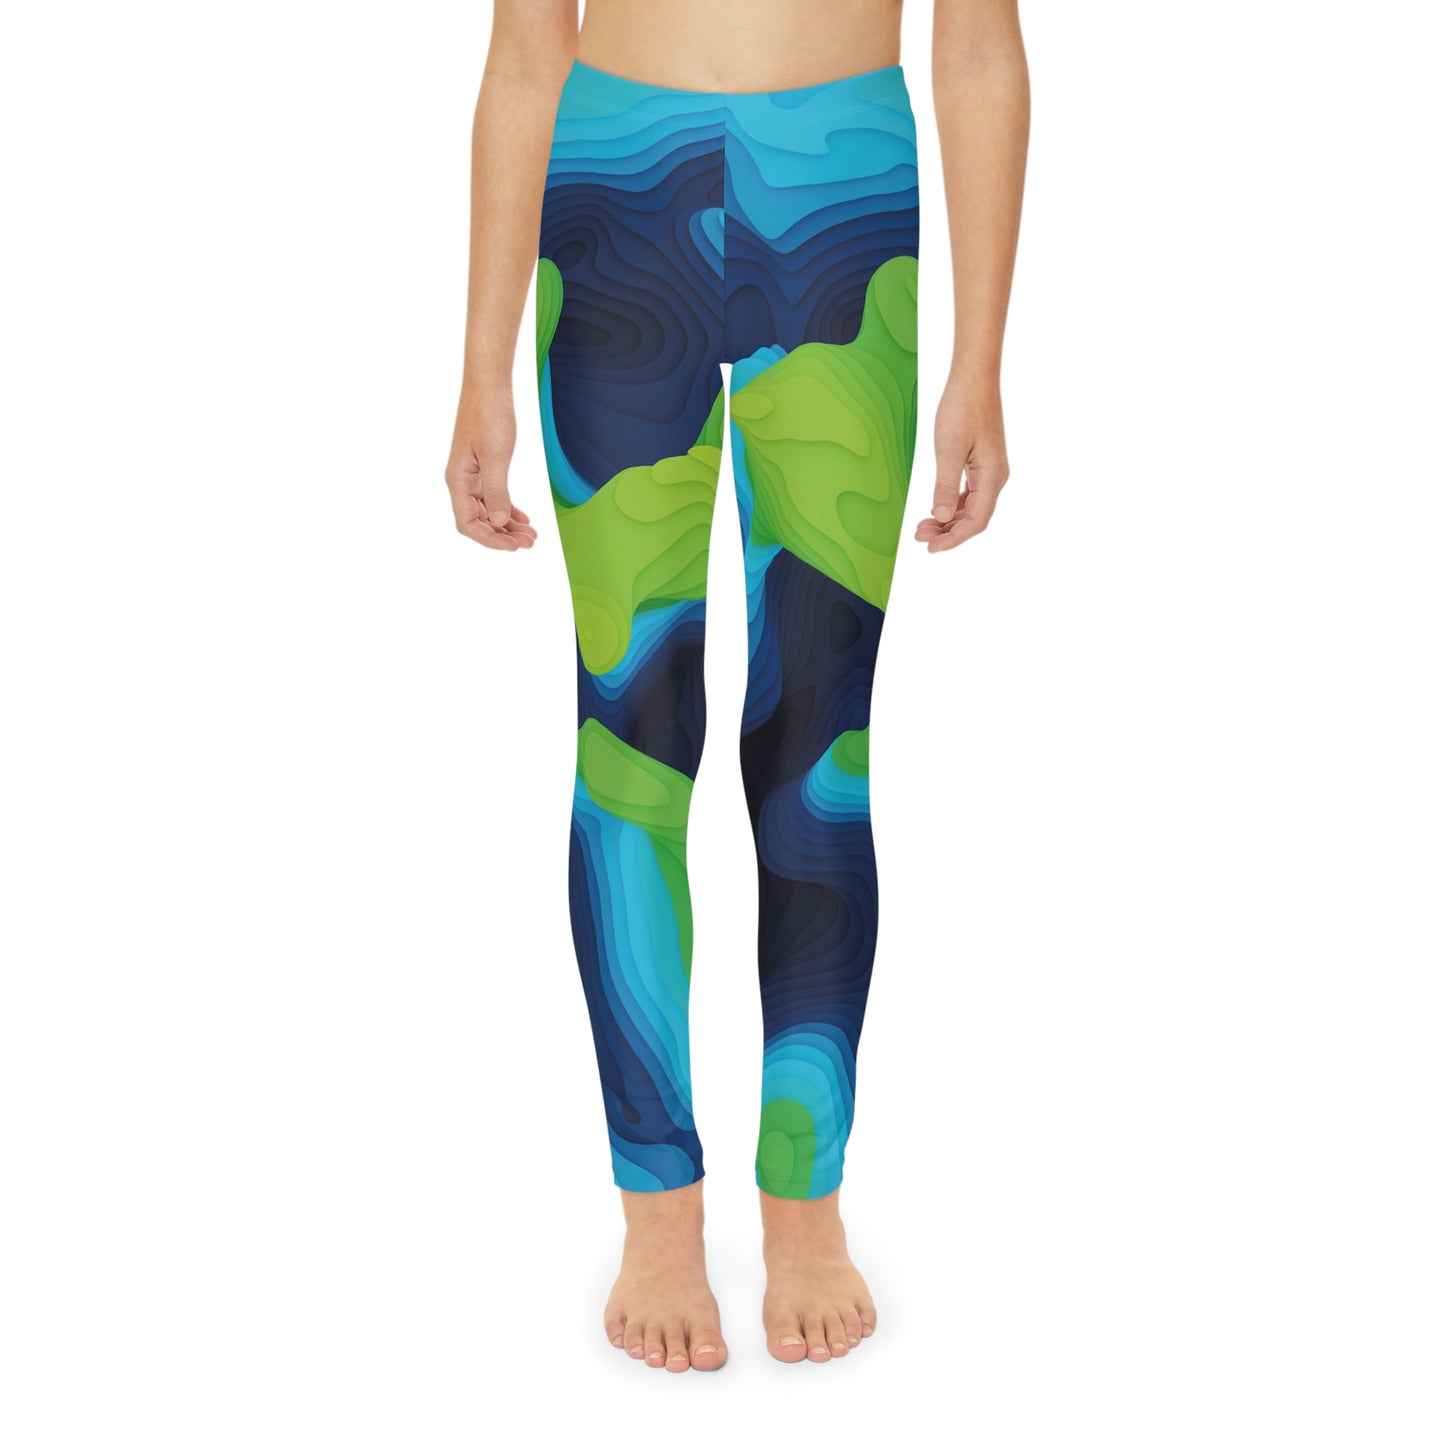 Youth Leggings,  One of a Kind Gift - Unique Workout Activewear tights for a kid Fitness Enthusiast , Daughter, Niece  Christmas Gift